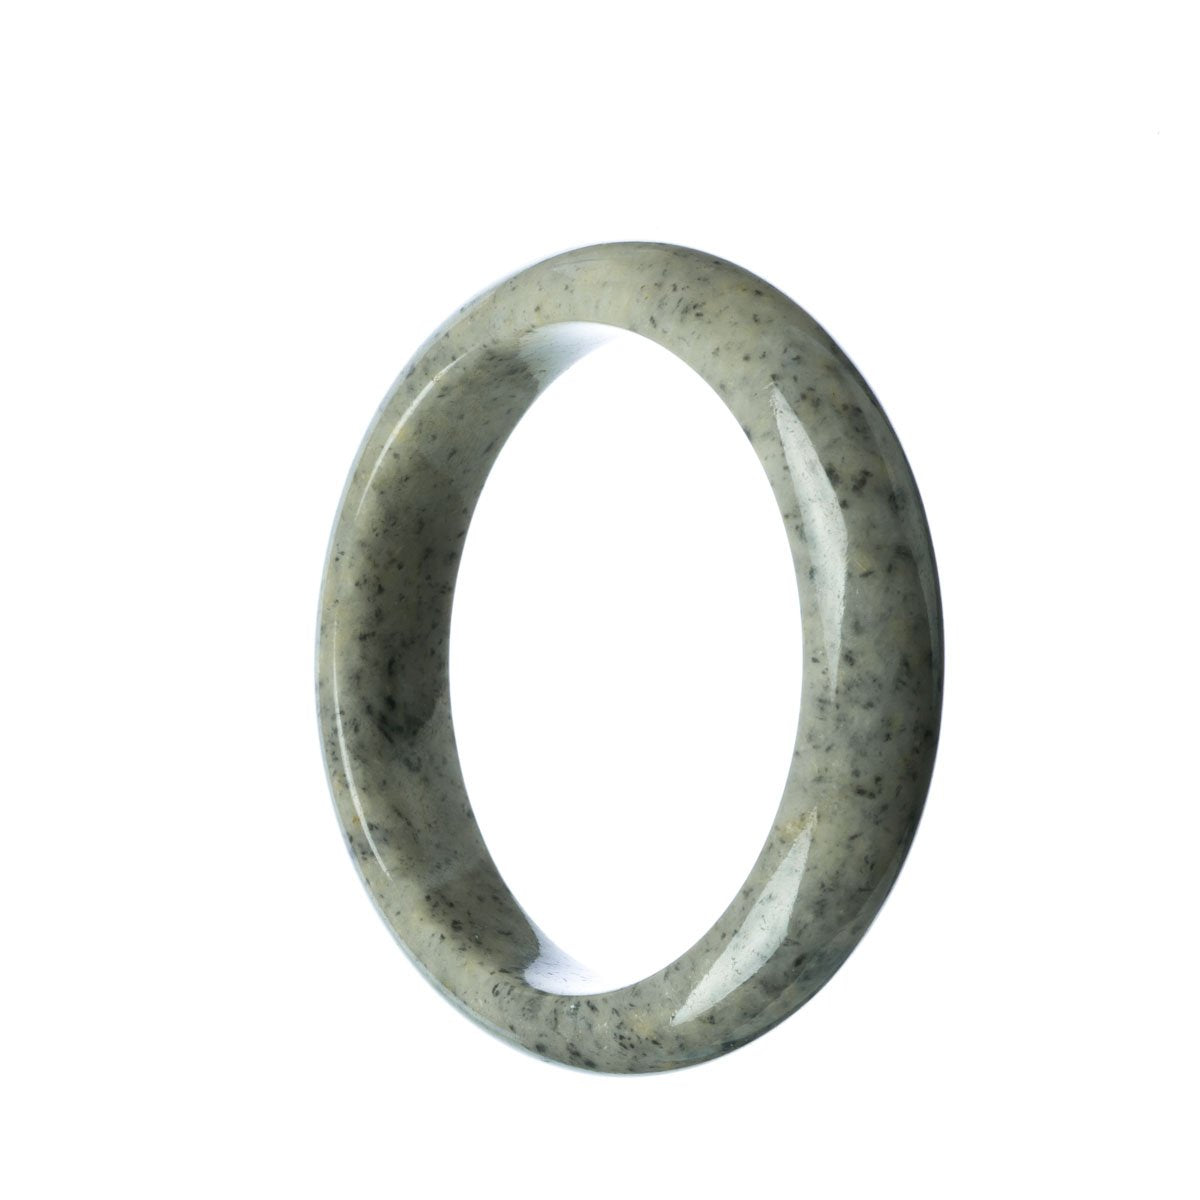 A beautiful grey jadeite bangle with a half moon shape, measuring 59mm in size. It is an authentic grade A jadeite, perfect for adding elegance and style to any outfit.